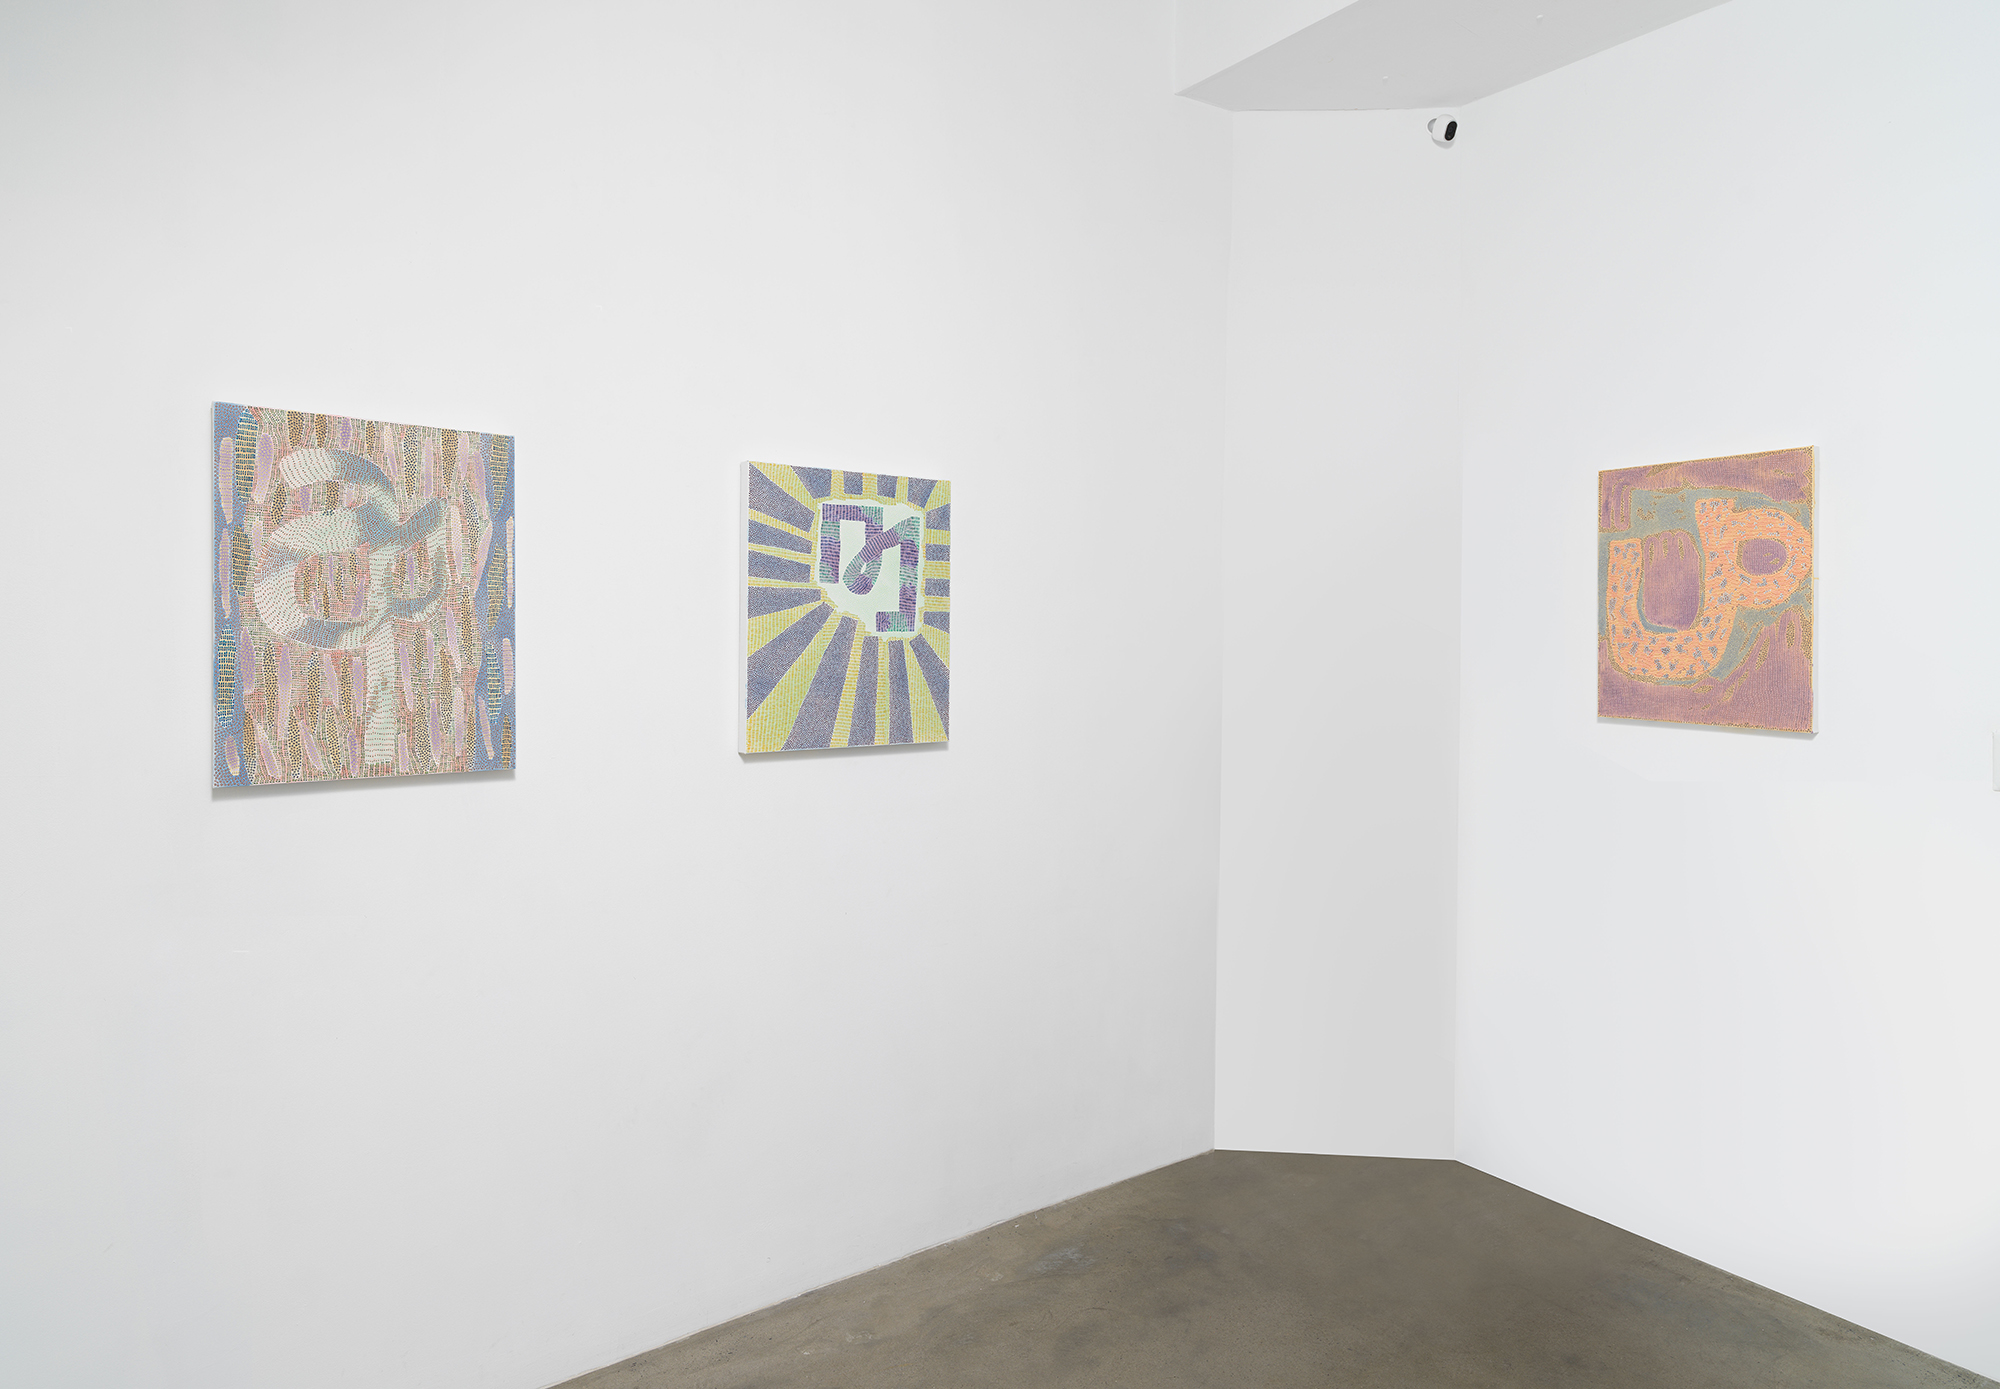 Installation view of Nadia Haji Omar 'Ellipsis' showing paintings on canvas